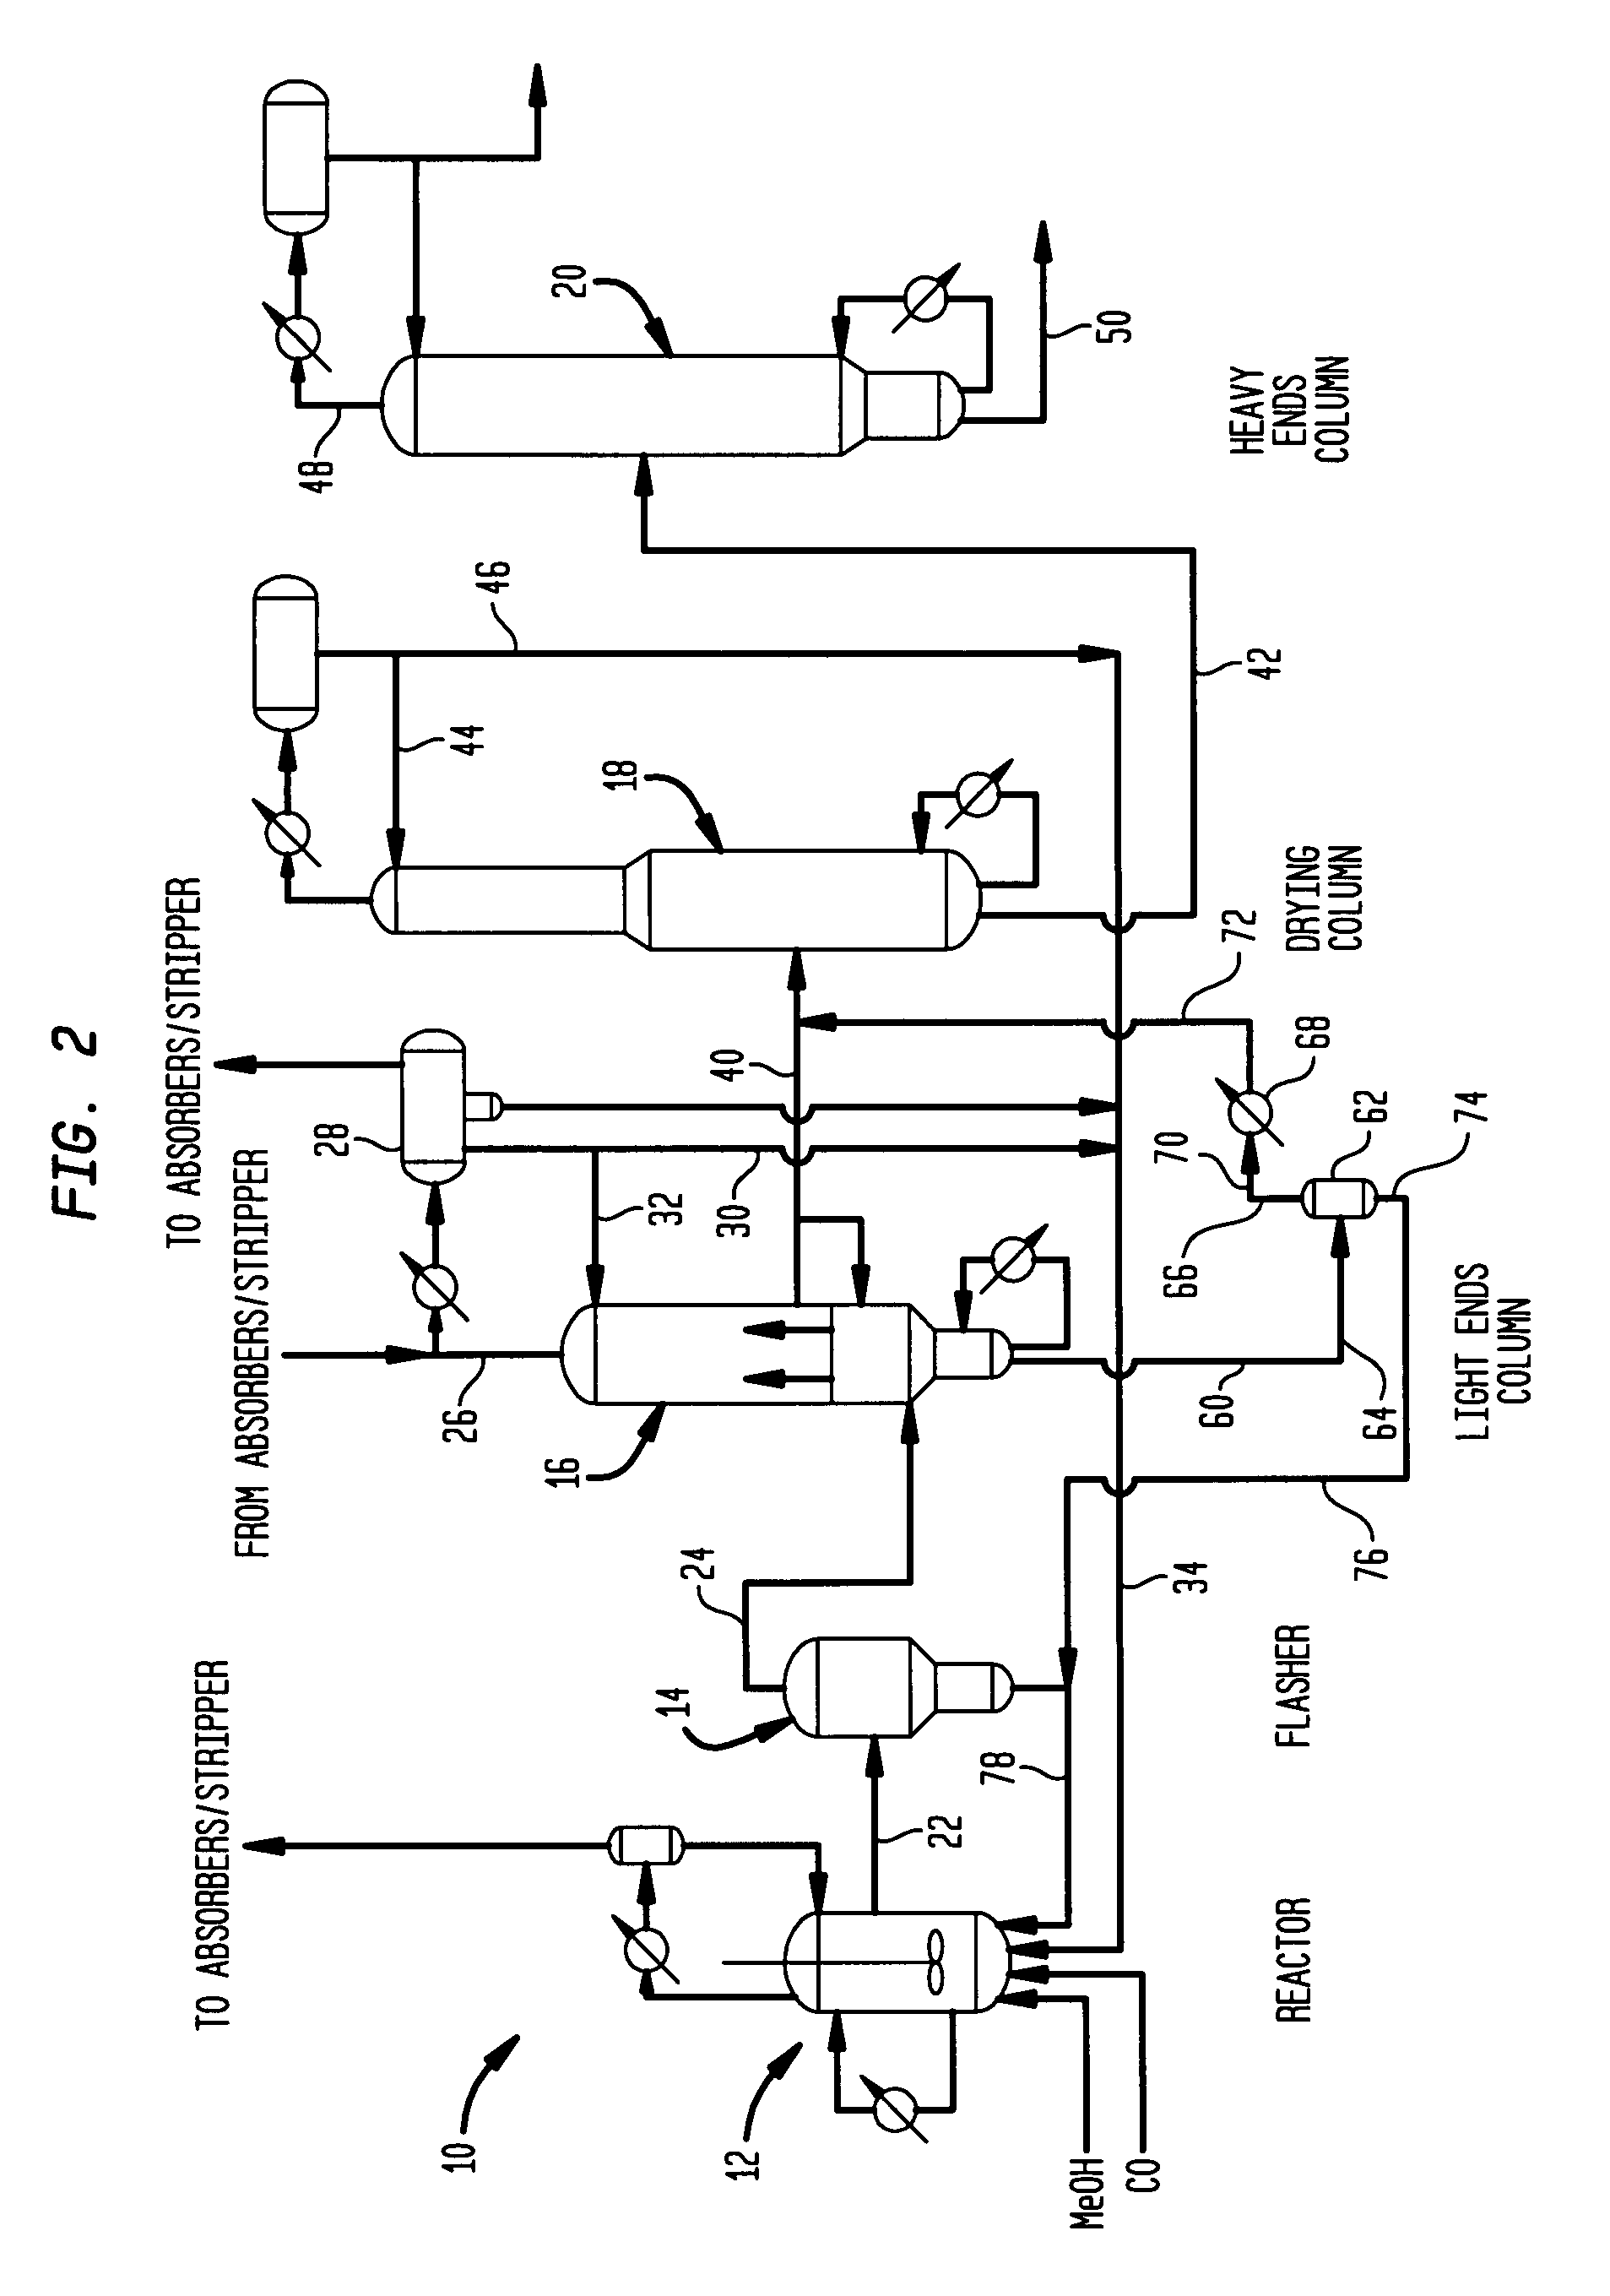 Method and apparatus for making acetic acid with improved productivity